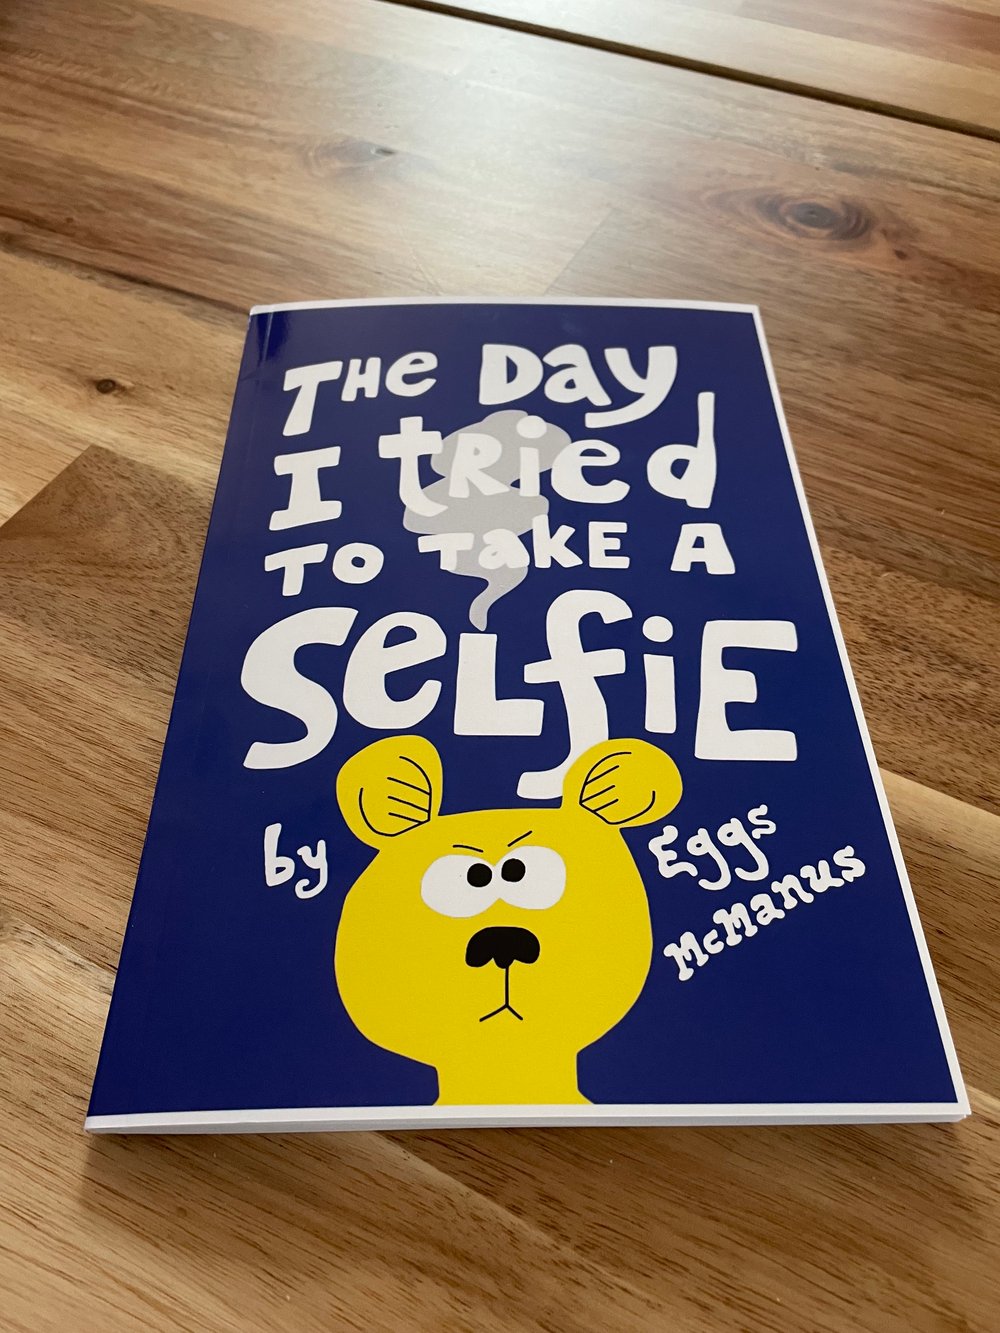 The Day I Tried To Take A Selfie available at Amazon!